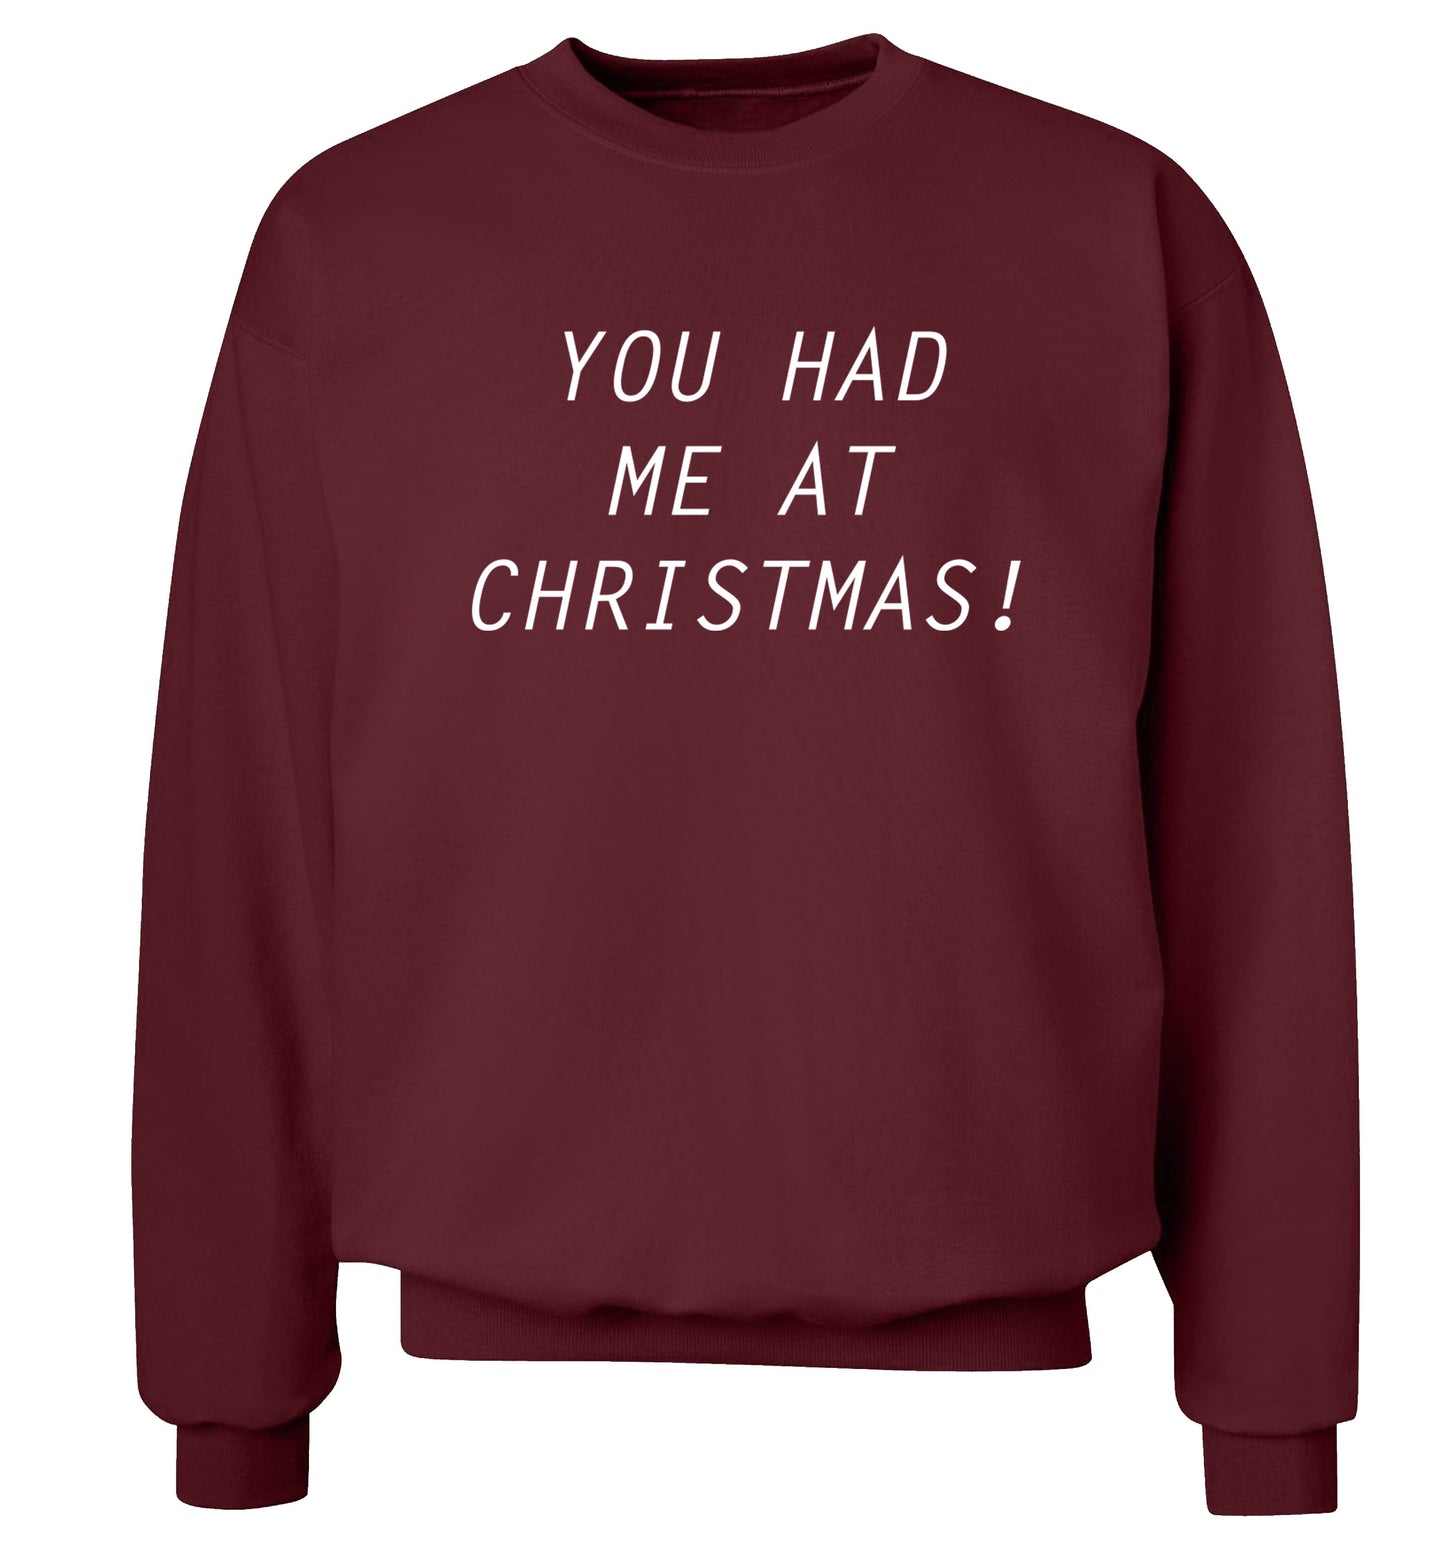 You had me at Christmas Adult's unisex maroon Sweater 2XL